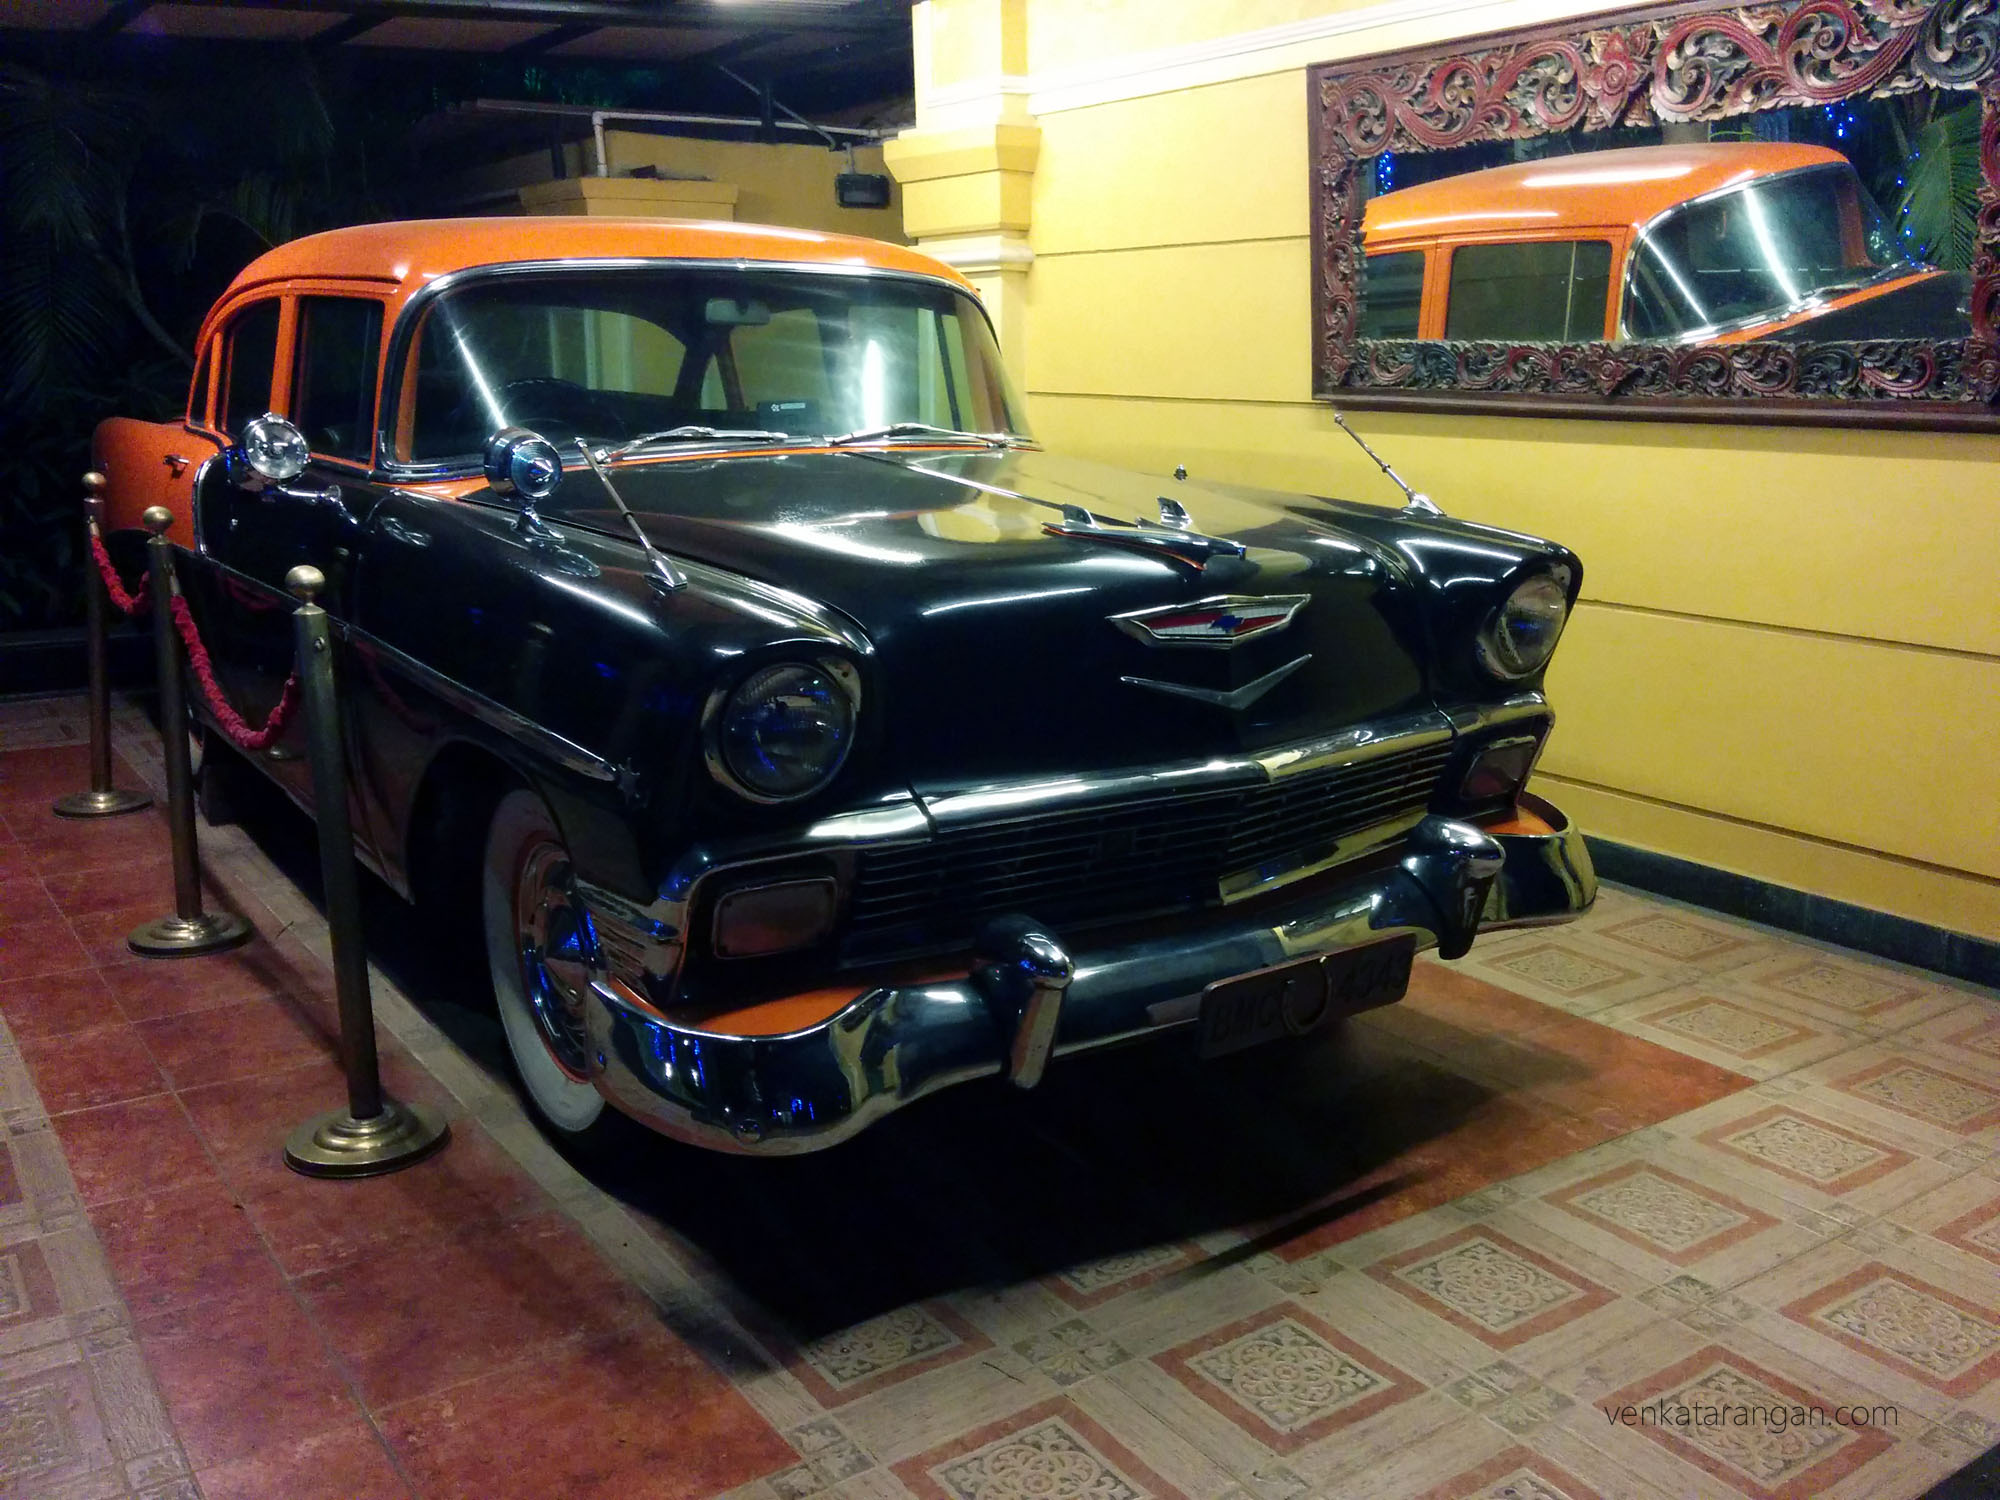 Mayfair Lagoon - An antique chevy on display